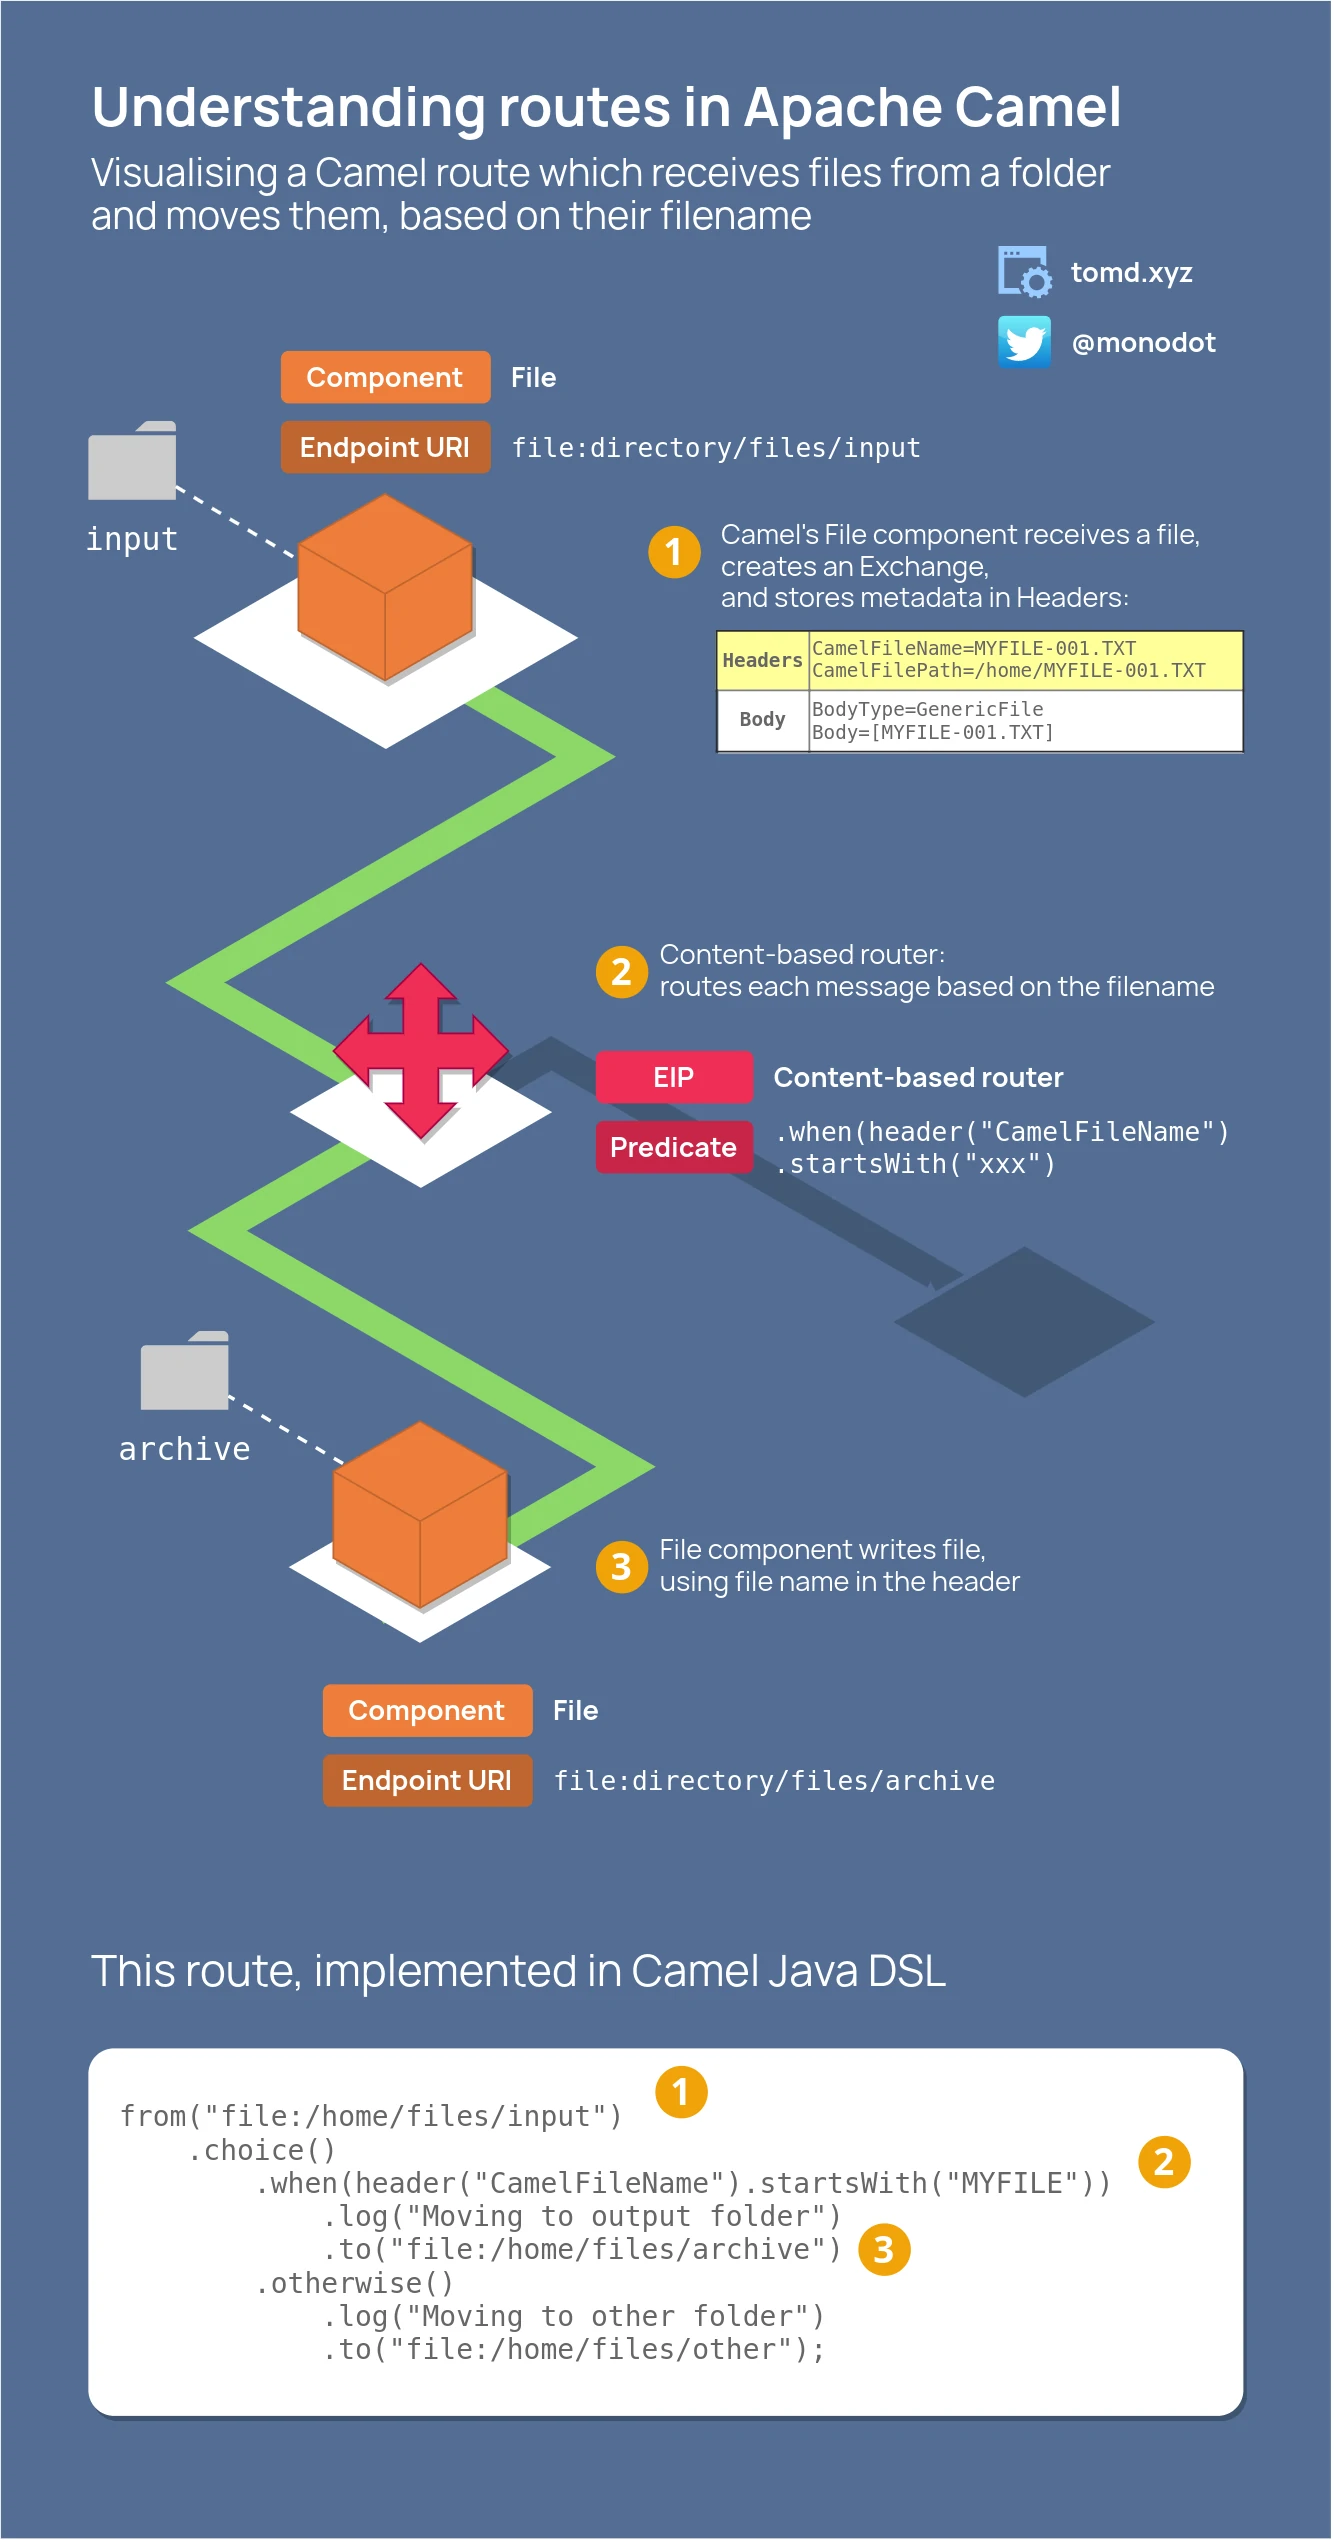 Infographic showing a Camel route, featuring components, endpoint URI, EIP, Predicate, content-based router and a Camel route